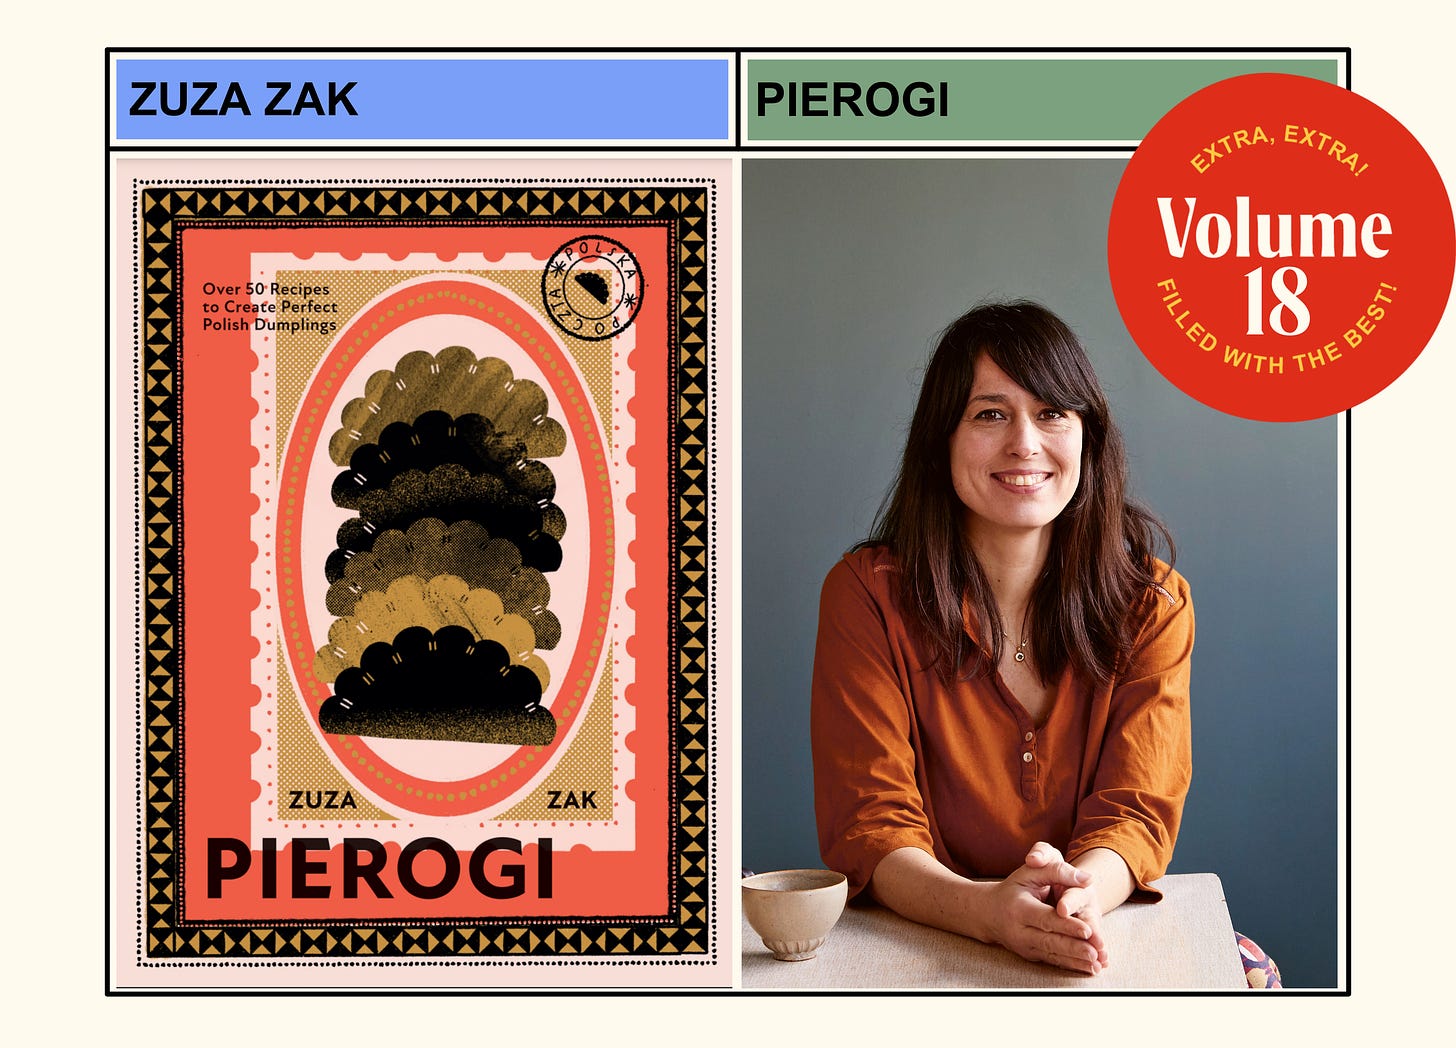 A graphic with the cover of Pierogi, the cookbook by Zuza Zak, alongside a headshot of Zuza sitting at a table